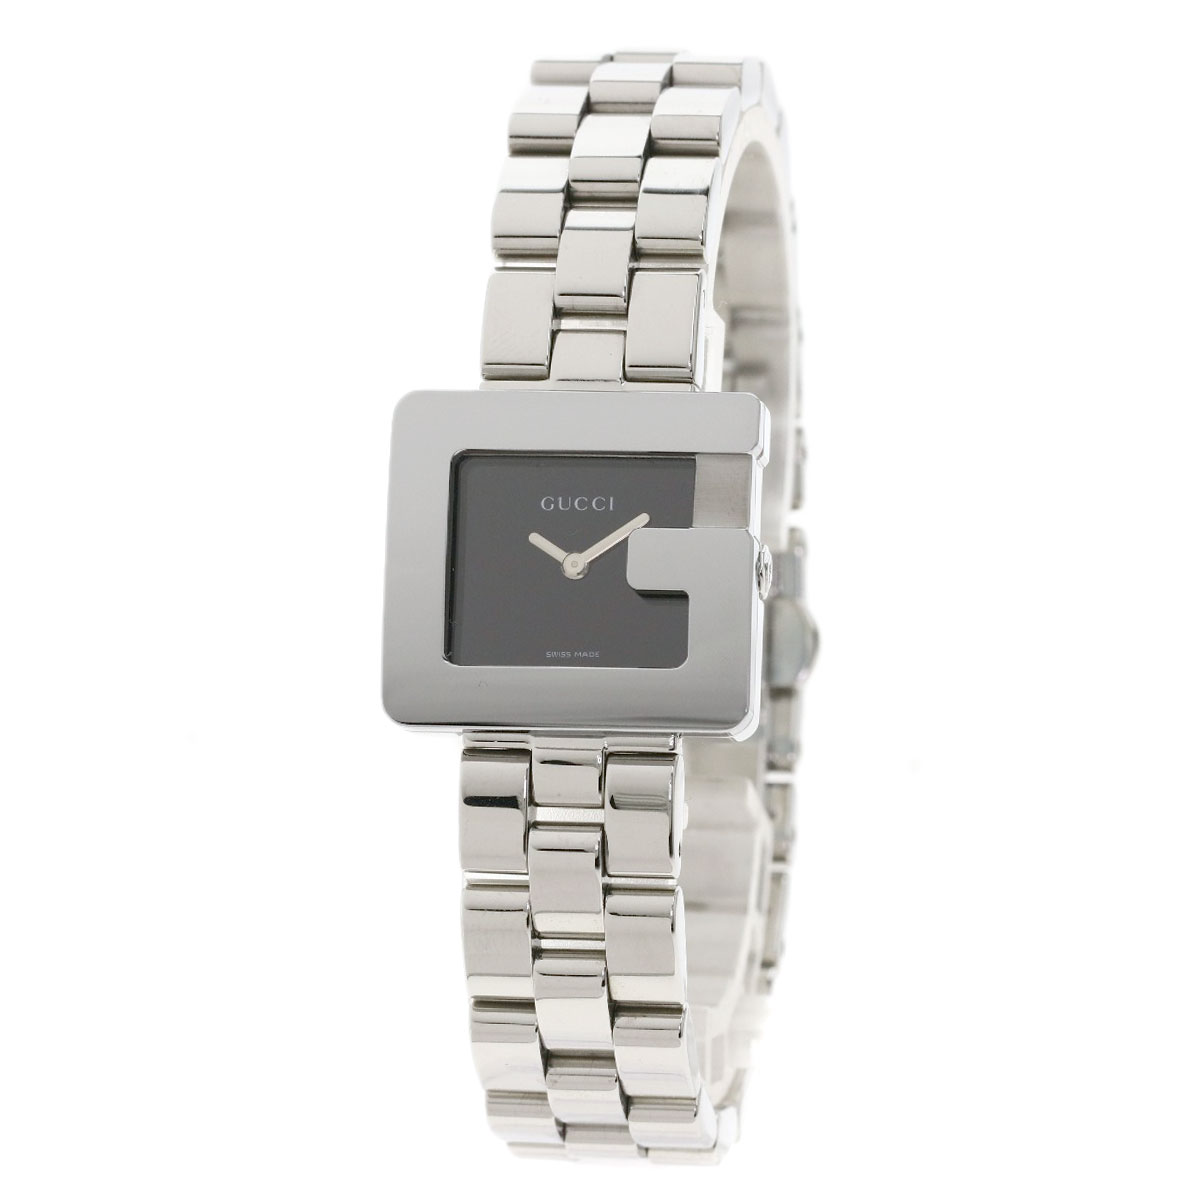 GUCCI Square face Watches 3600L Stainless Steel/Stainless Steel Ladies ...